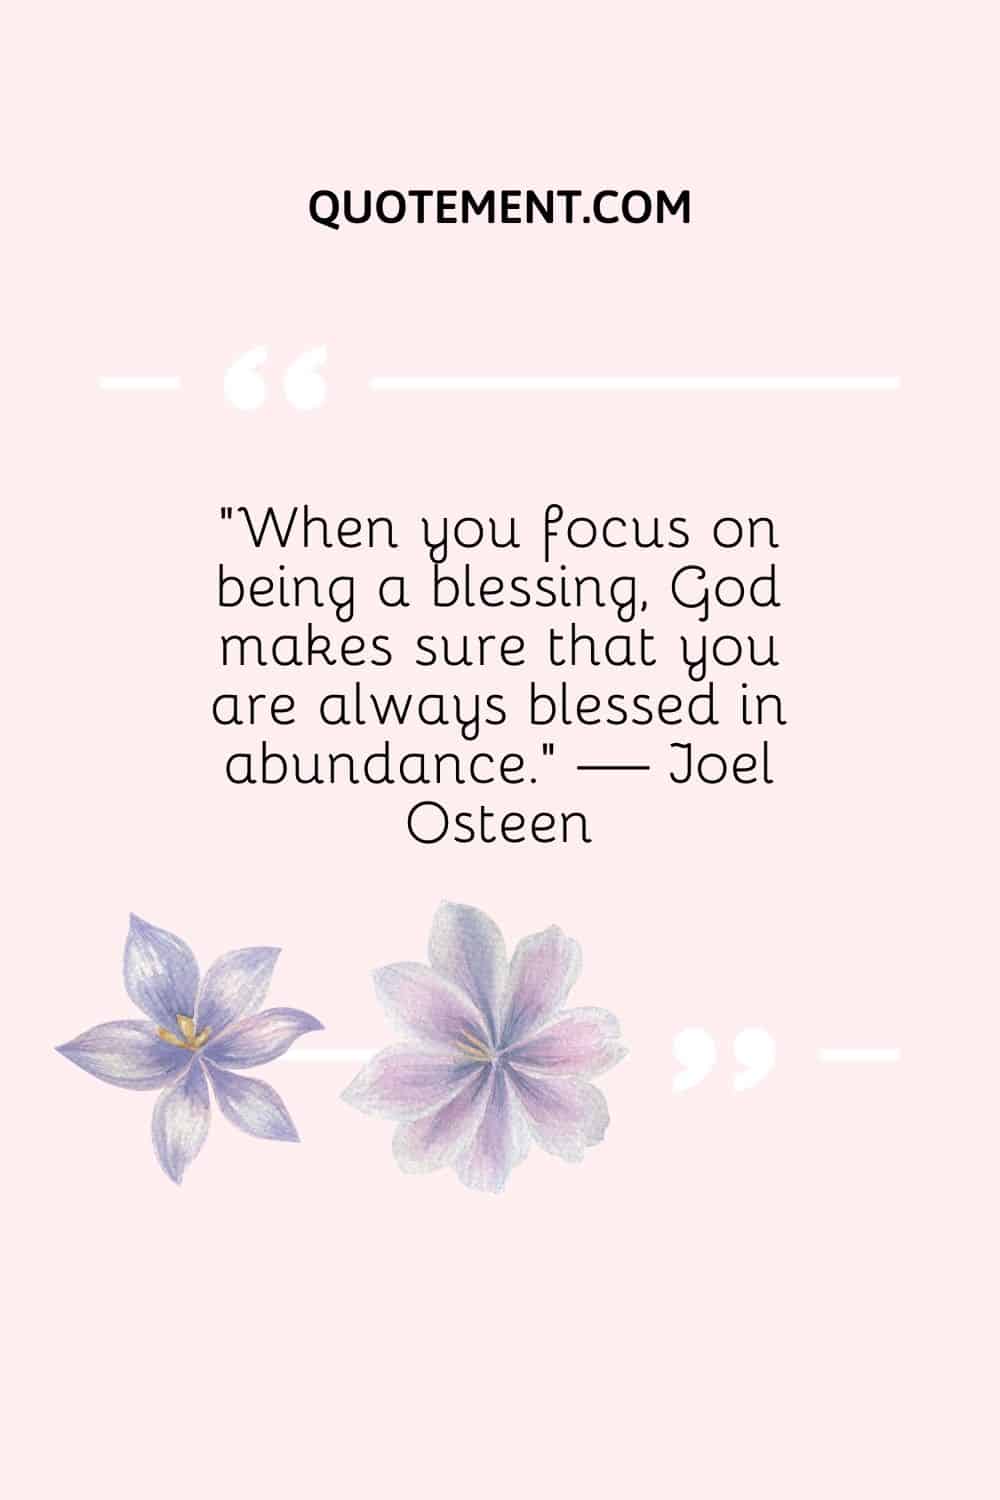 “When you focus on being a blessing, God makes sure that you are always blessed in abundance.” — Joel Osteen